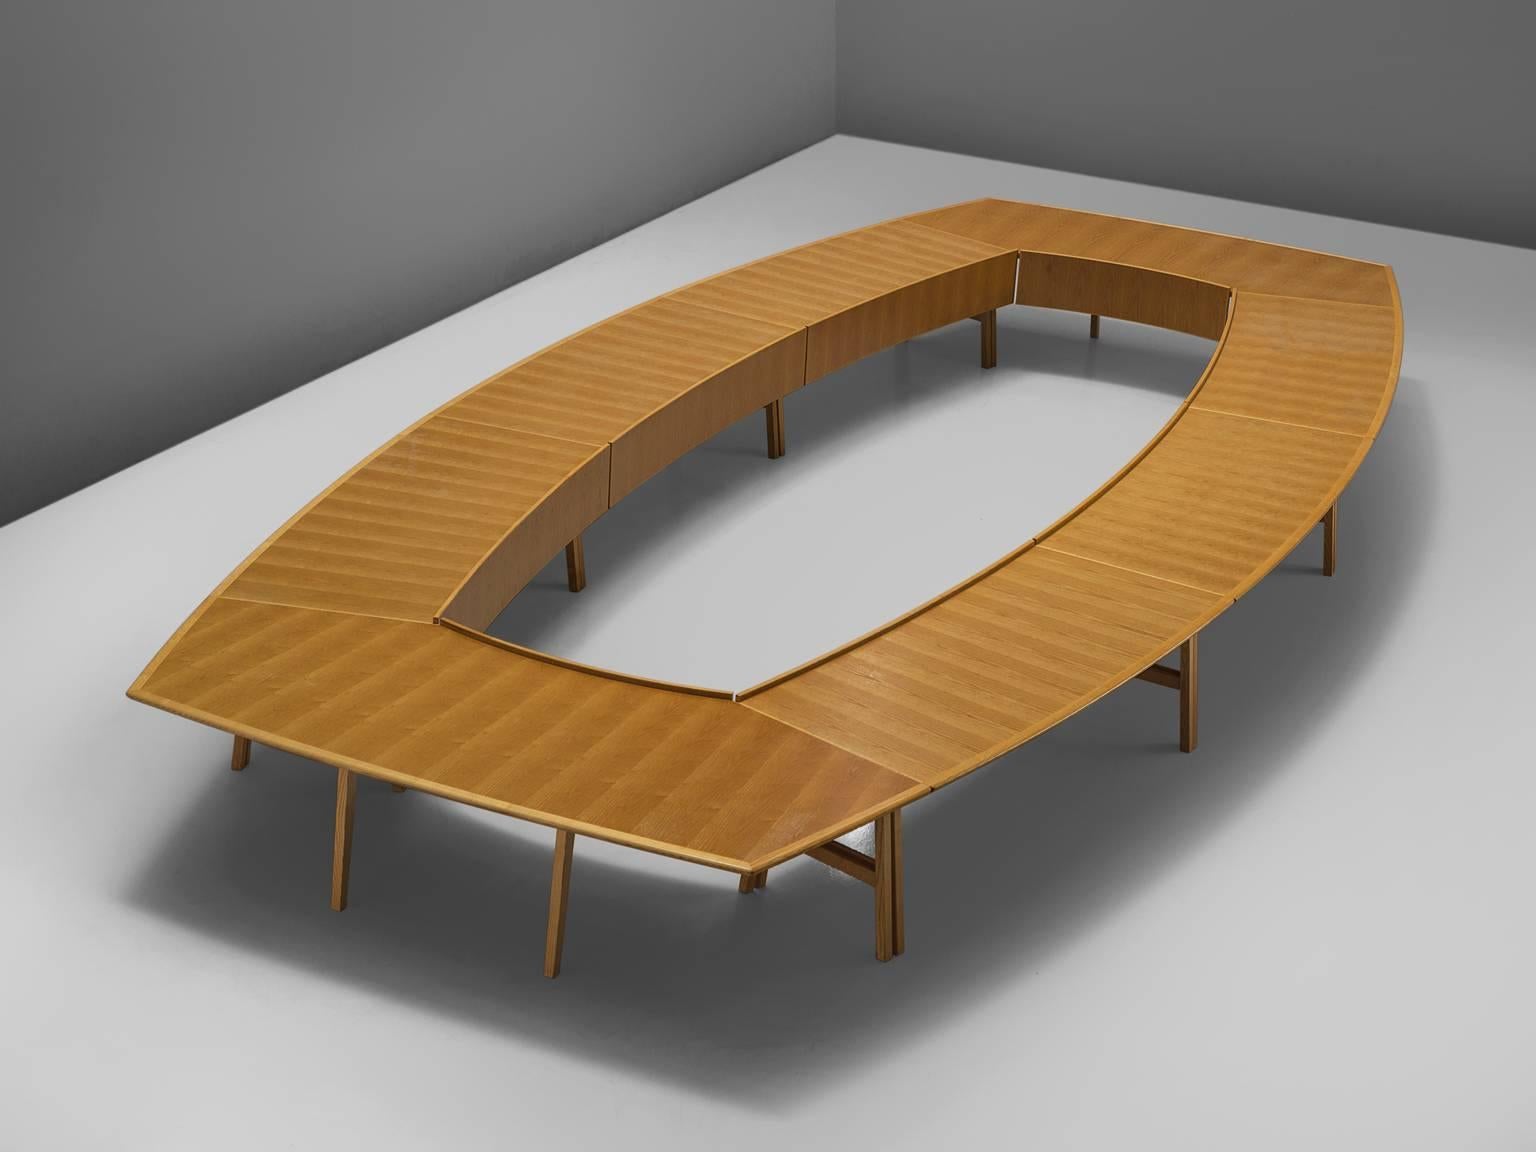 Hans Wegner for PP Møbler, conference table, ash, Denmark, 1970.

This large table was designed by Hans Wegner as a commission. The table is executed in ash and has a cornered oval shape with a large gap in the middle. The top features a pattern